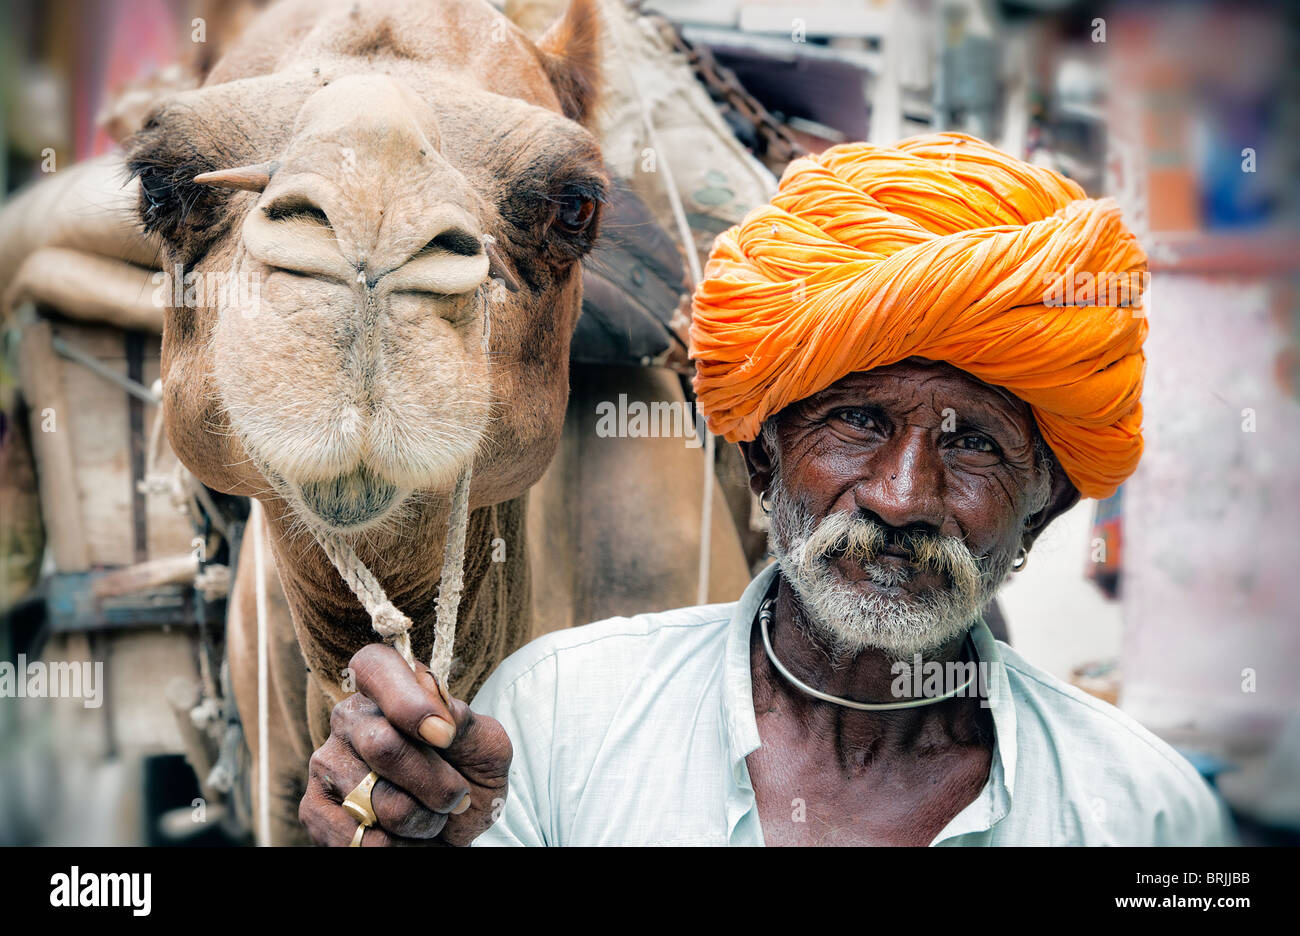 A Sikh camel driver in Rajasthan India Stock Photo